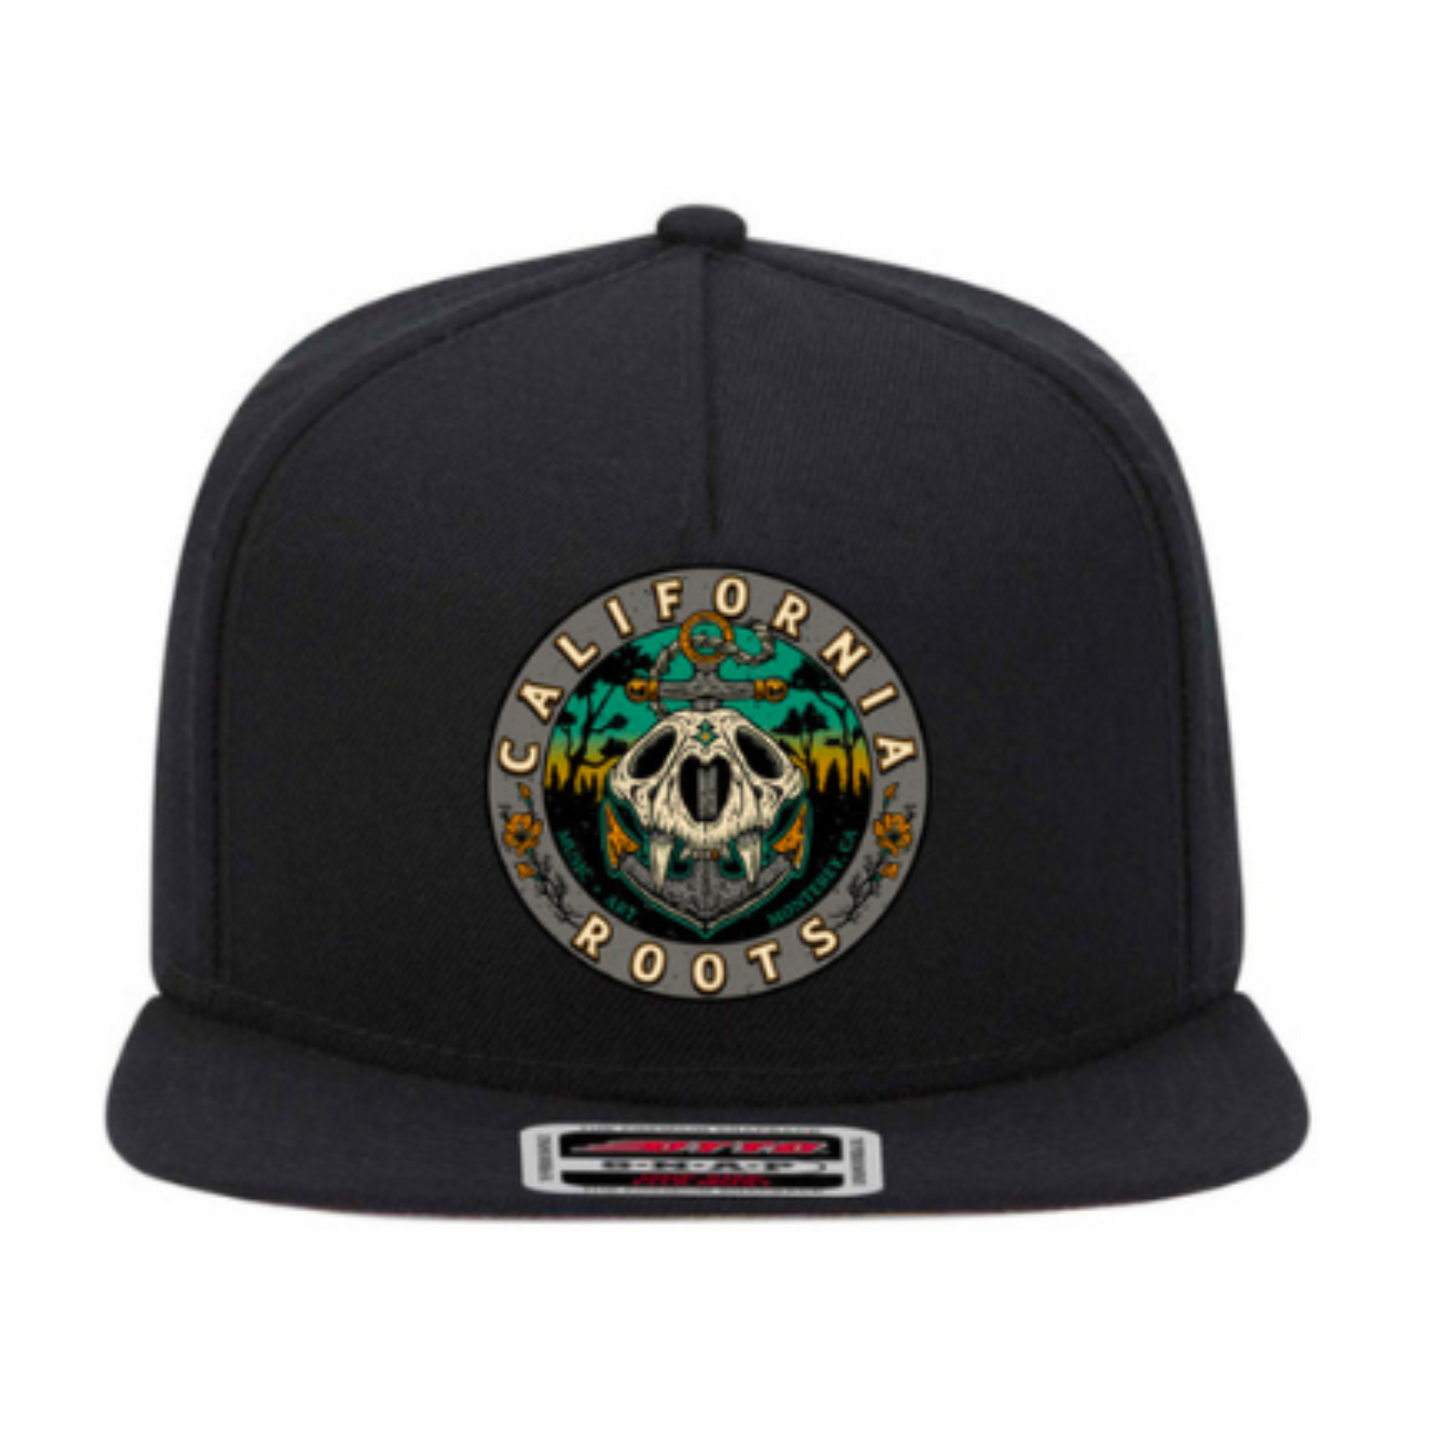 Cali Roots Skull Patch Hat